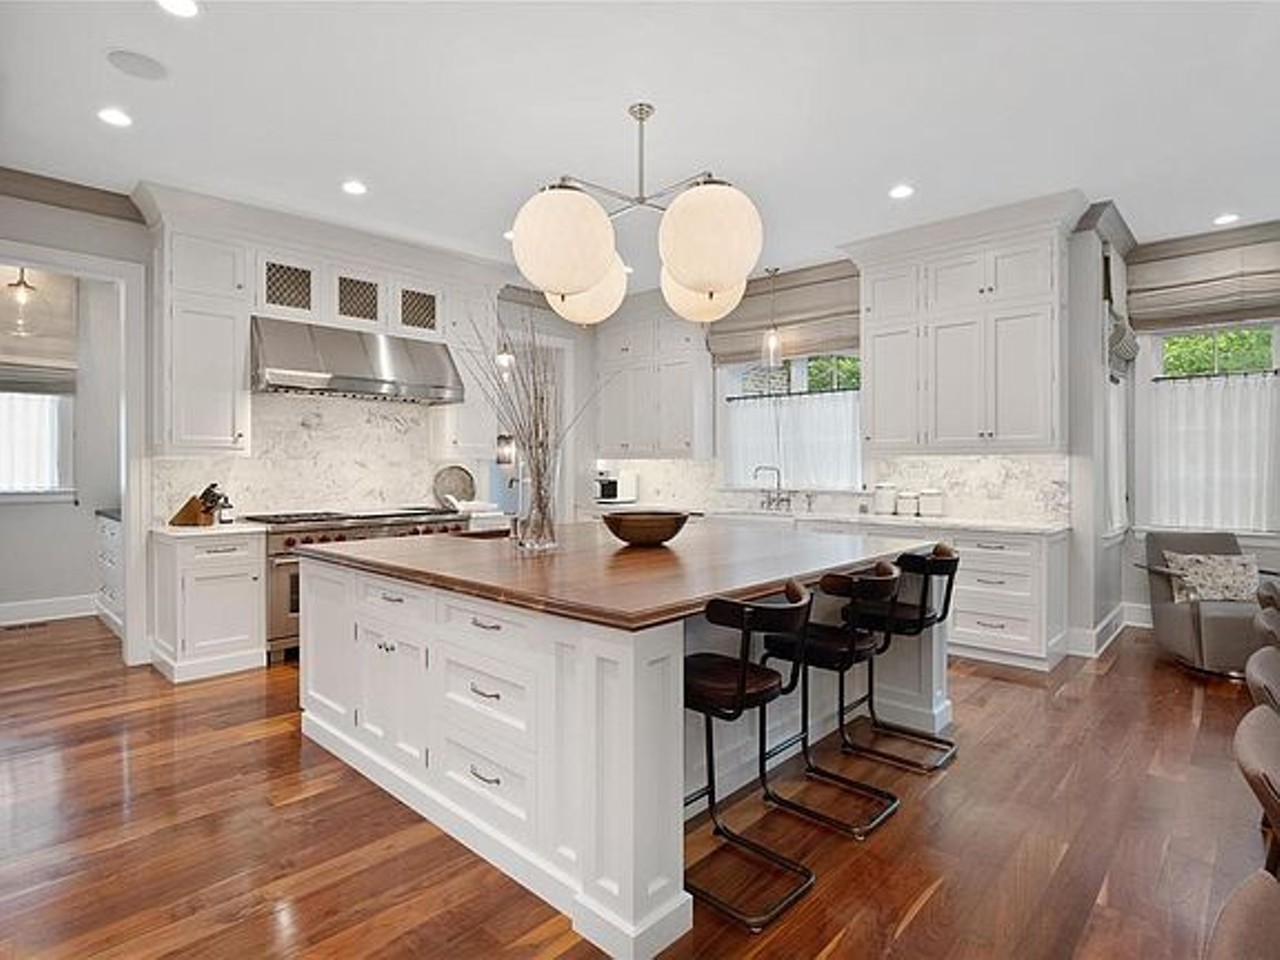 There's a Secret Room Hidden in the Basement of this Ladue House [PHOTOS]